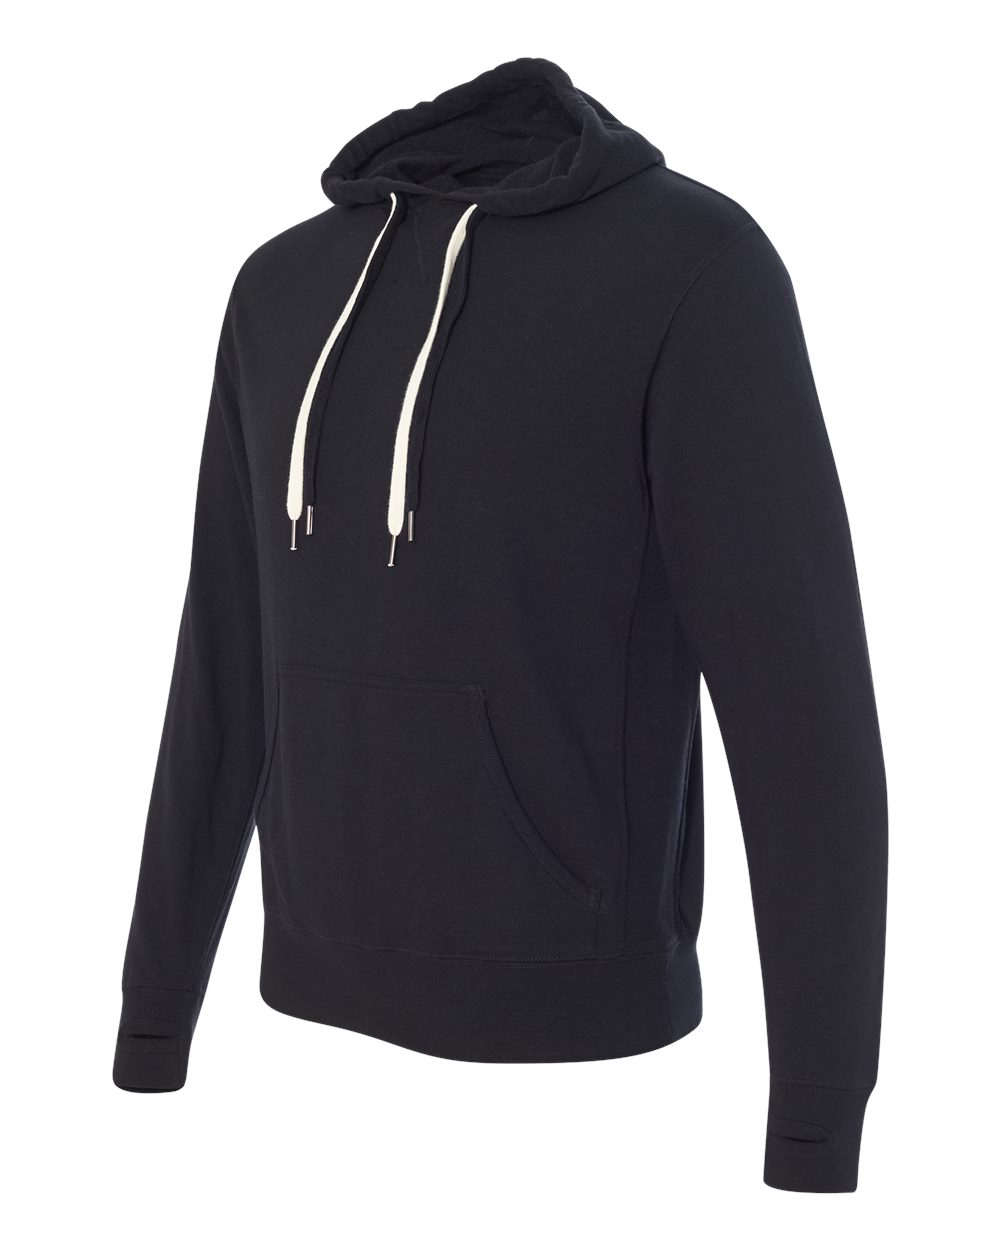 Independent Trading Co. PRM90HT - Unisex Midweight French Terry Hooded Pullover Sweatshirt